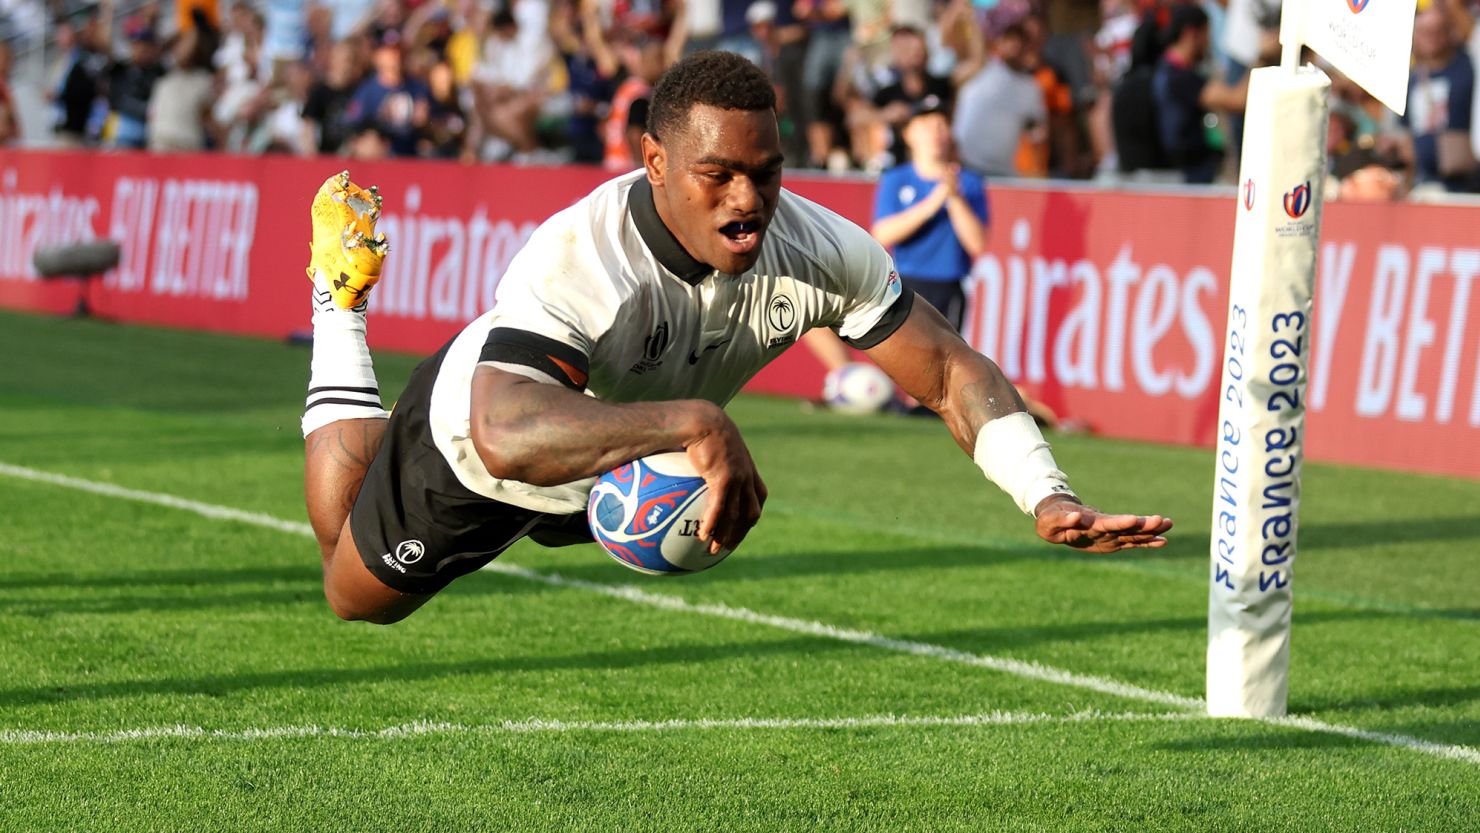 SAINT-ETIENNE, FRANCE - SEPTEMBER 17: Josua Tuisova of Fiji scores his team's first try during the Rugby World Cup France 2023 match between Australia and Fiji at Stade Geoffroy-Guichard on September 17, 2023 in Saint-Etienne, France. (Photo by Catherine Ivill/Getty Images)